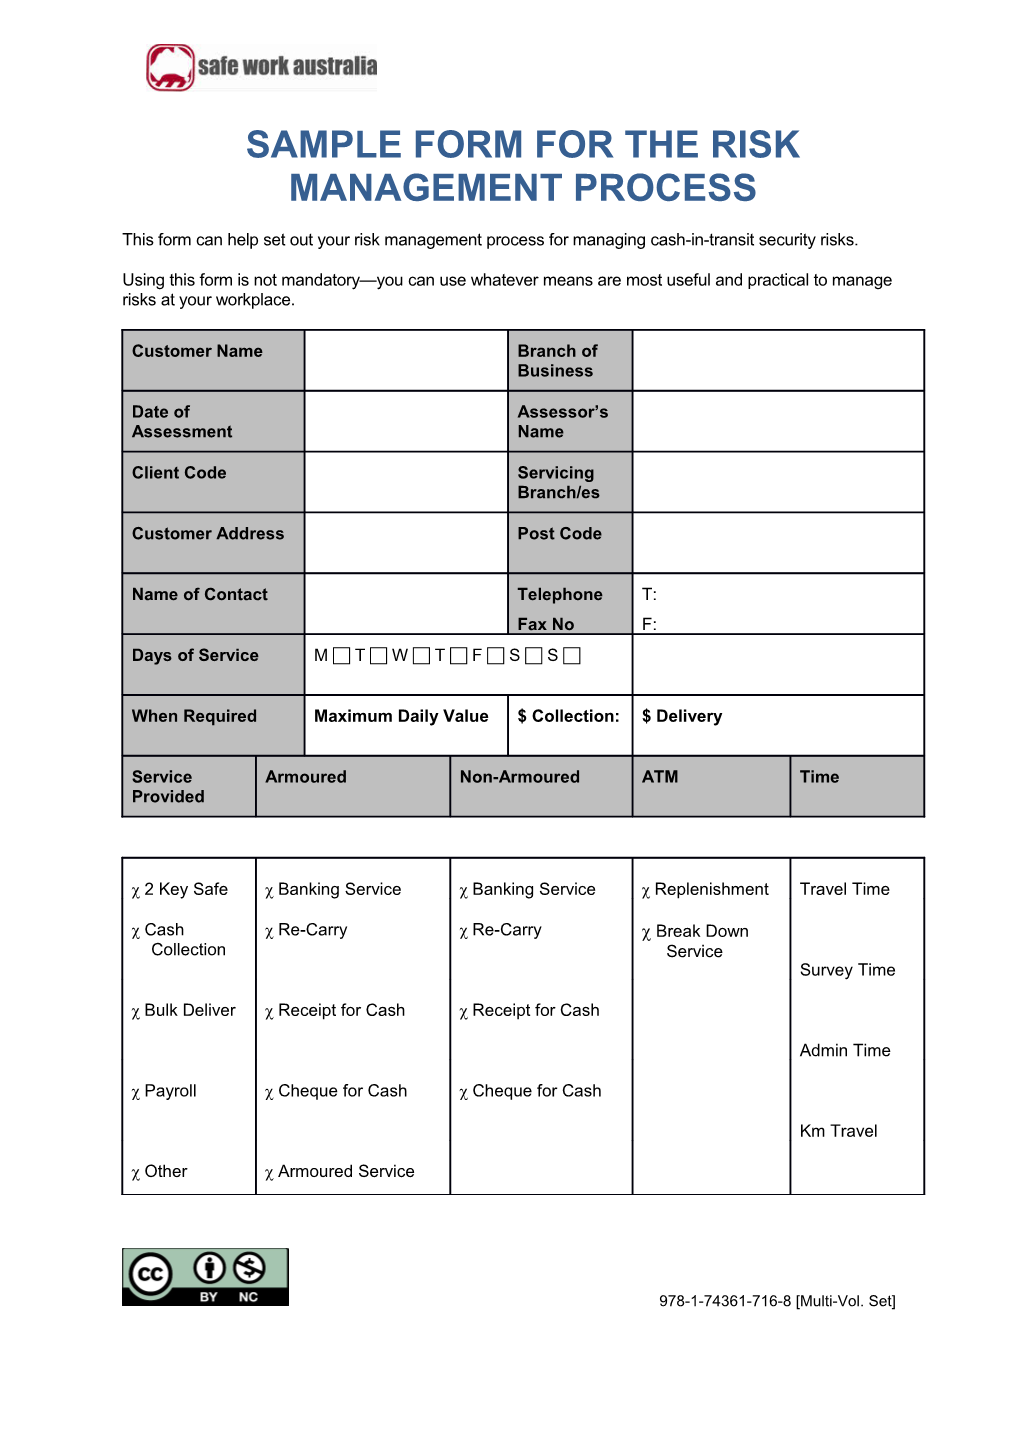 5. Sample Form for the Risk Management Process